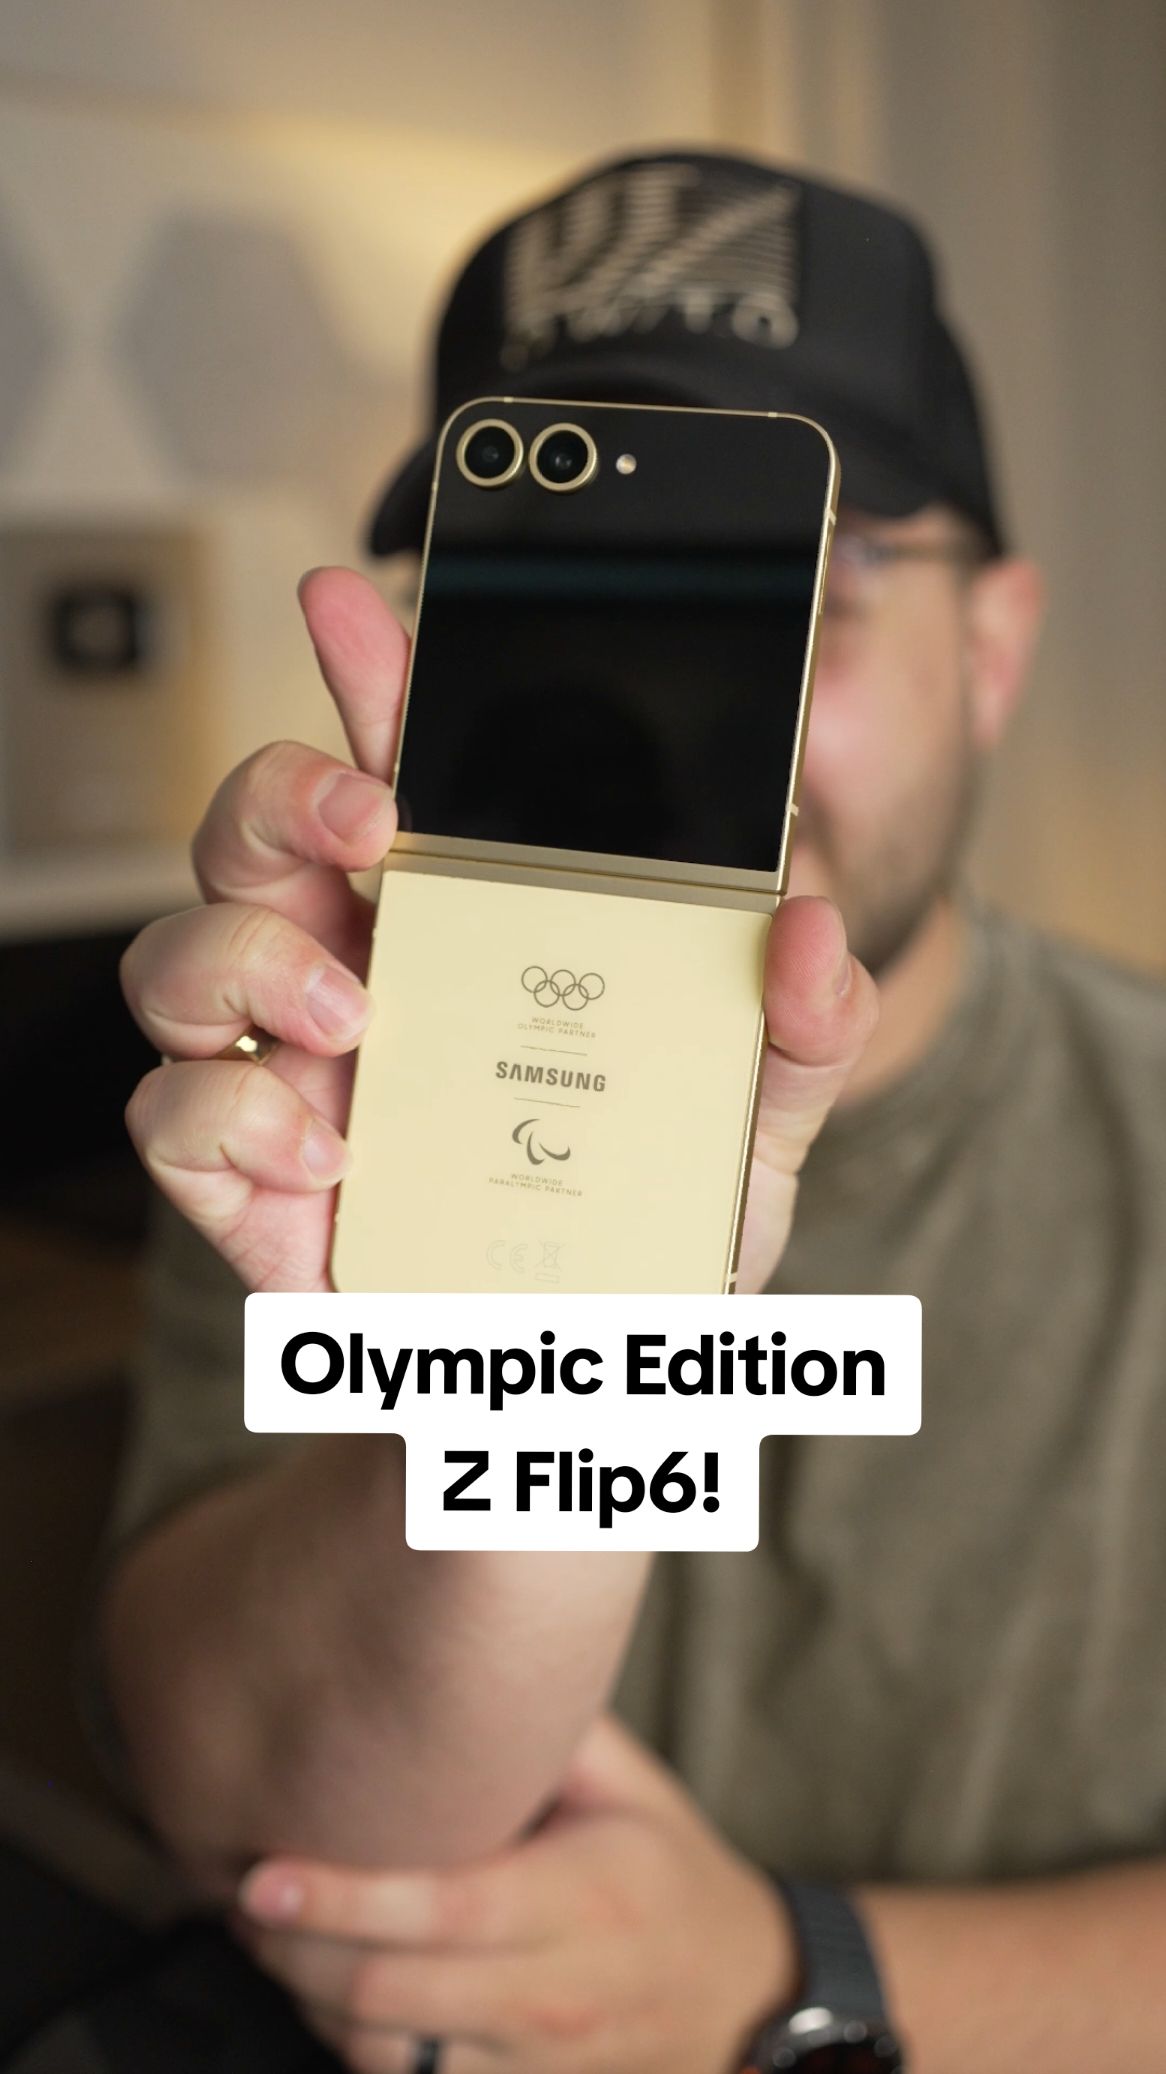 Thanks to @SamsungUS for letting my try the Olympic edition of the Galaxy Z Flip6! #tech #techtok #samsung #android #zflip6 #olympics #imparkerburton #androidguy #techguy 